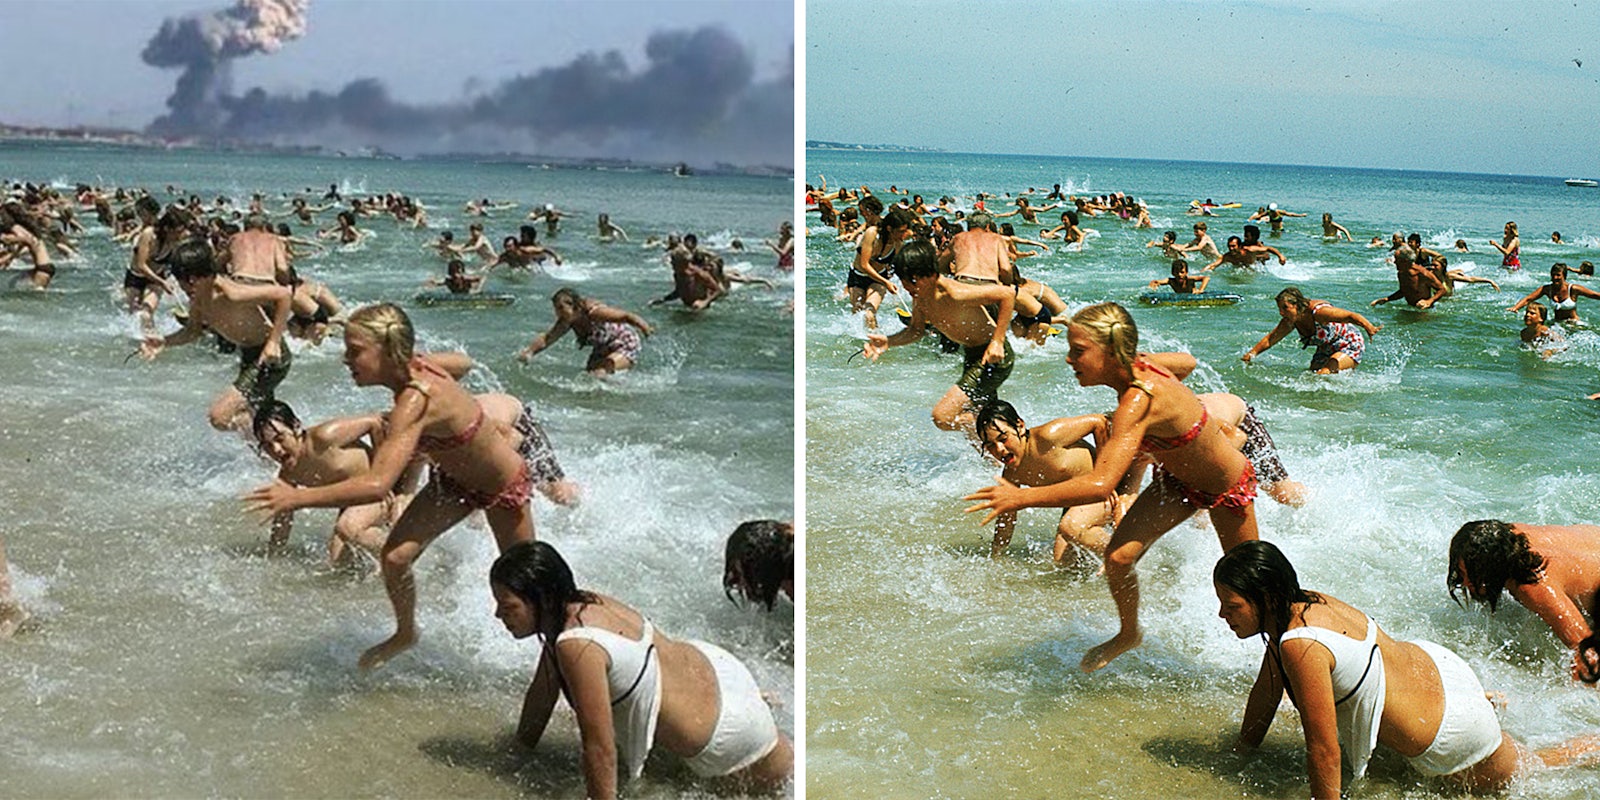 A still image from 'Jaws' is being used to try and blame Russia for beach bombing